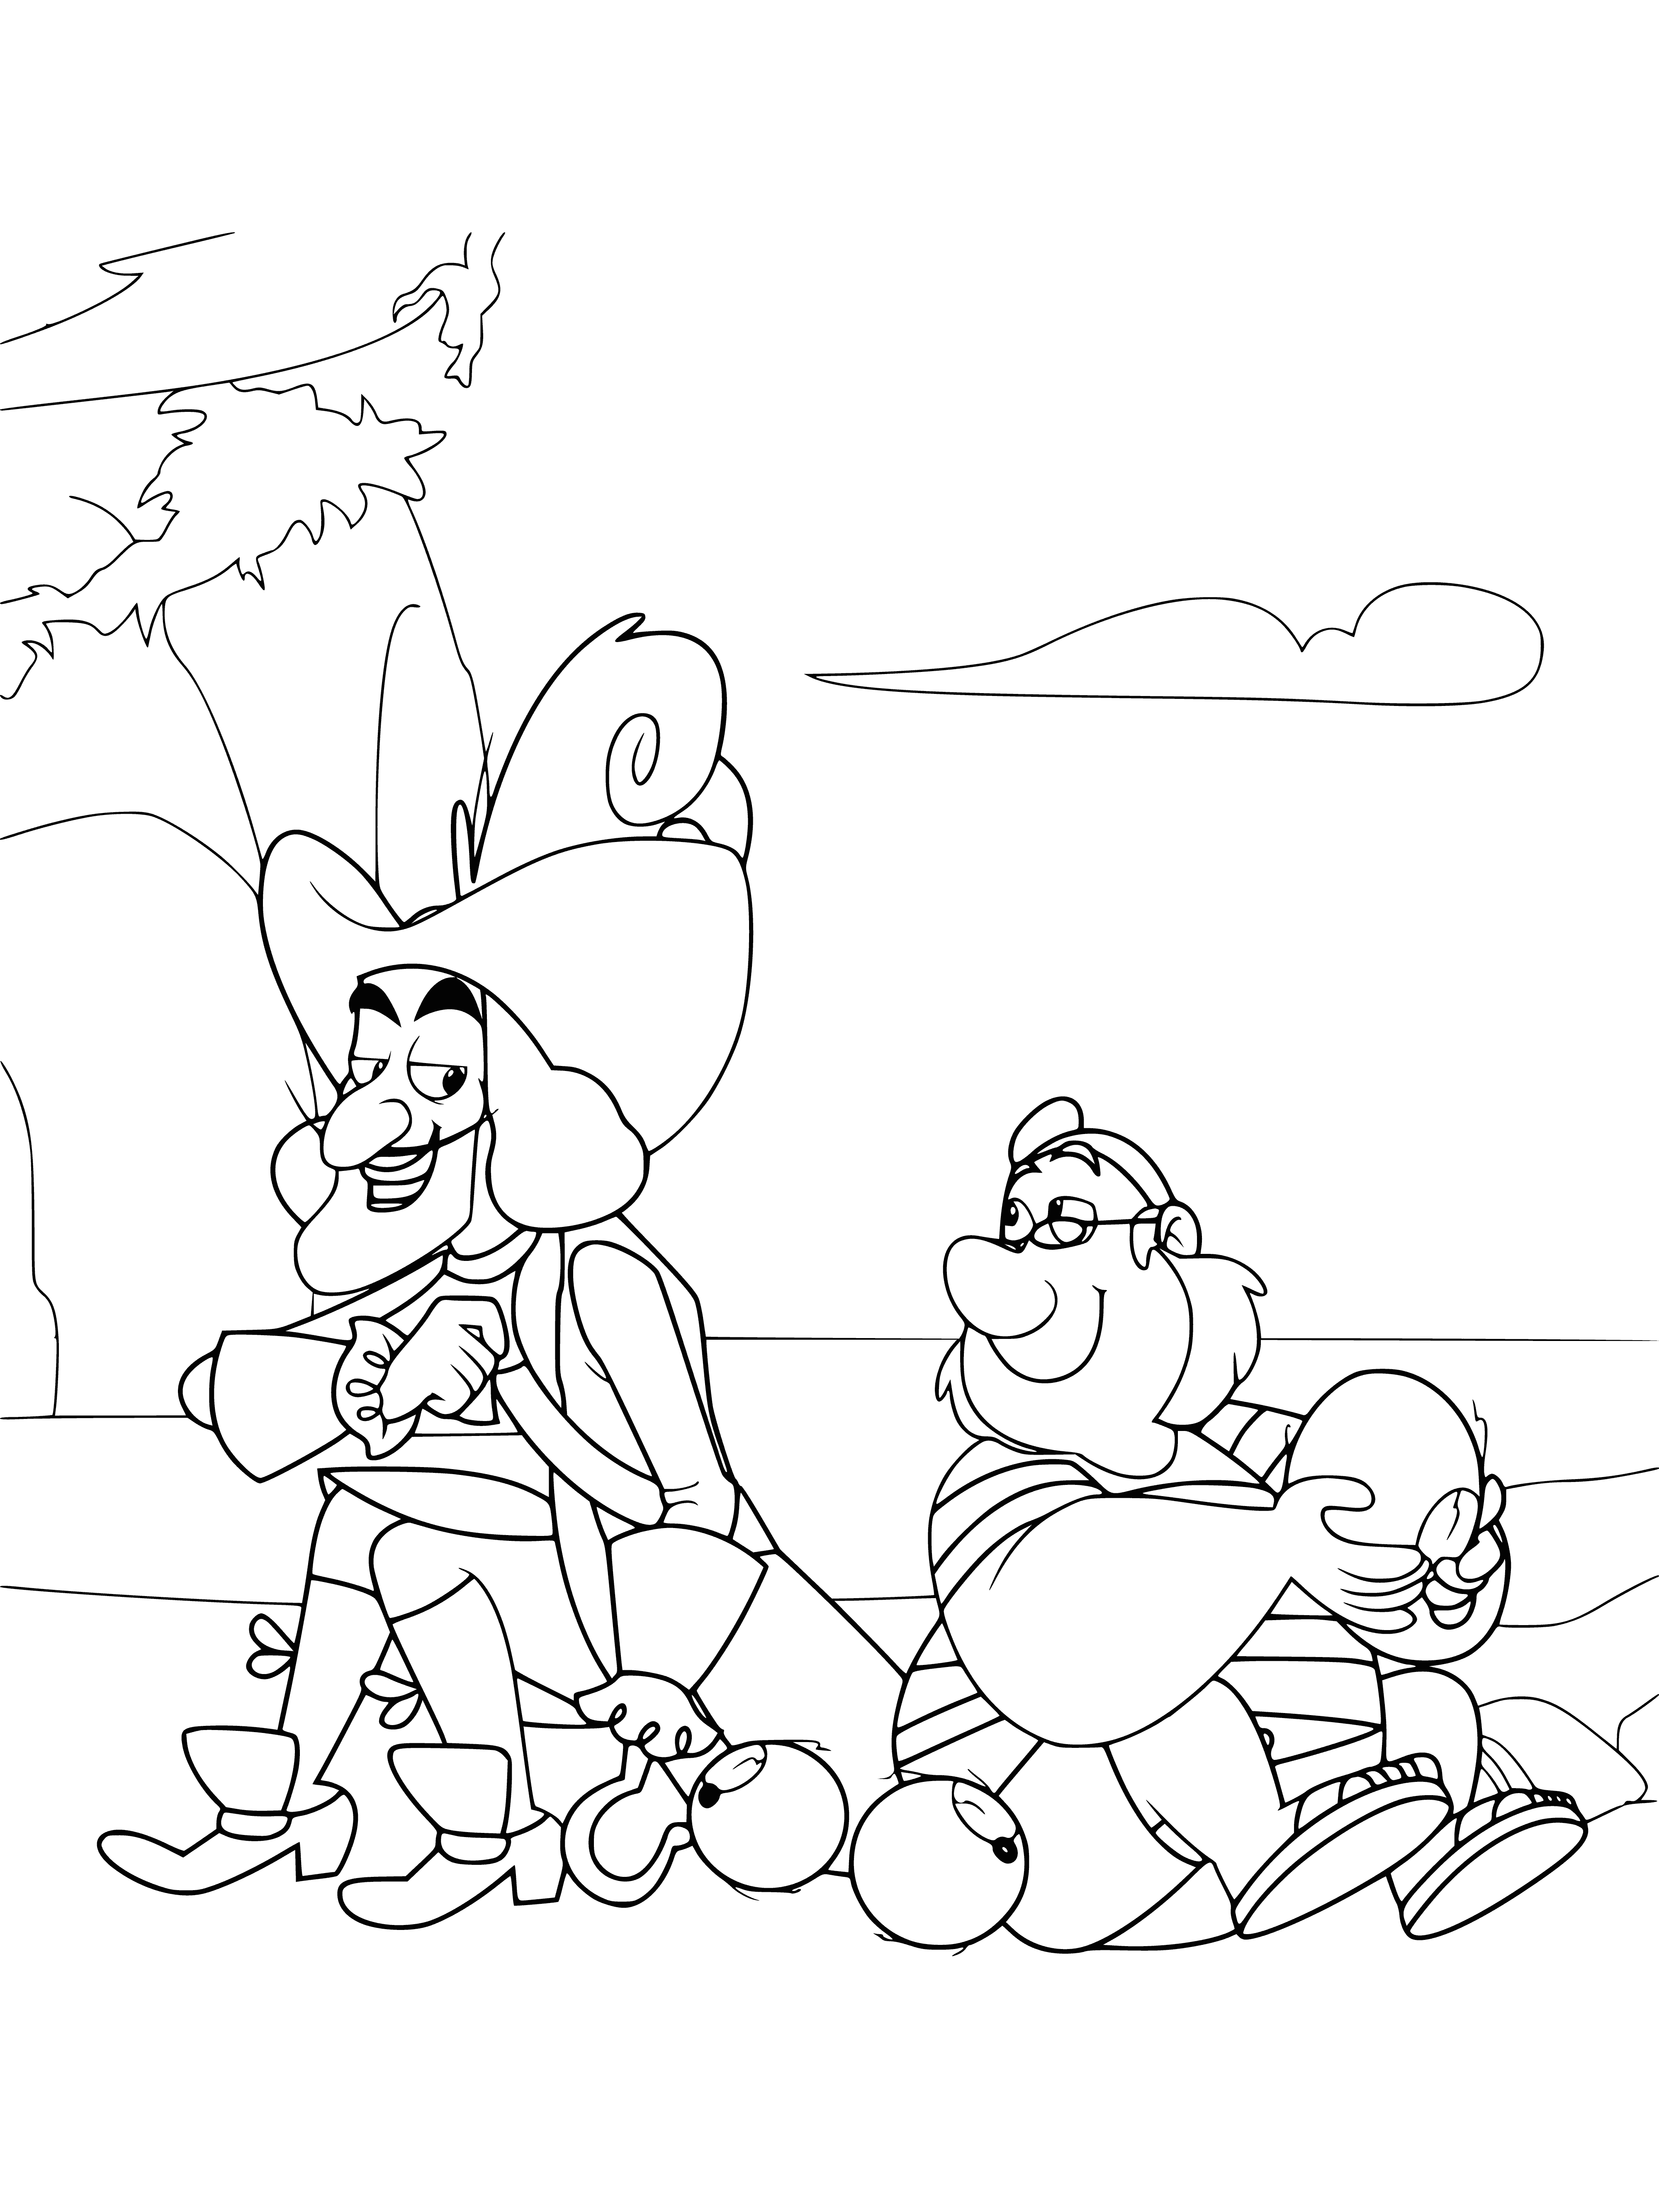 Captain Hook and Mr Smee coloring page